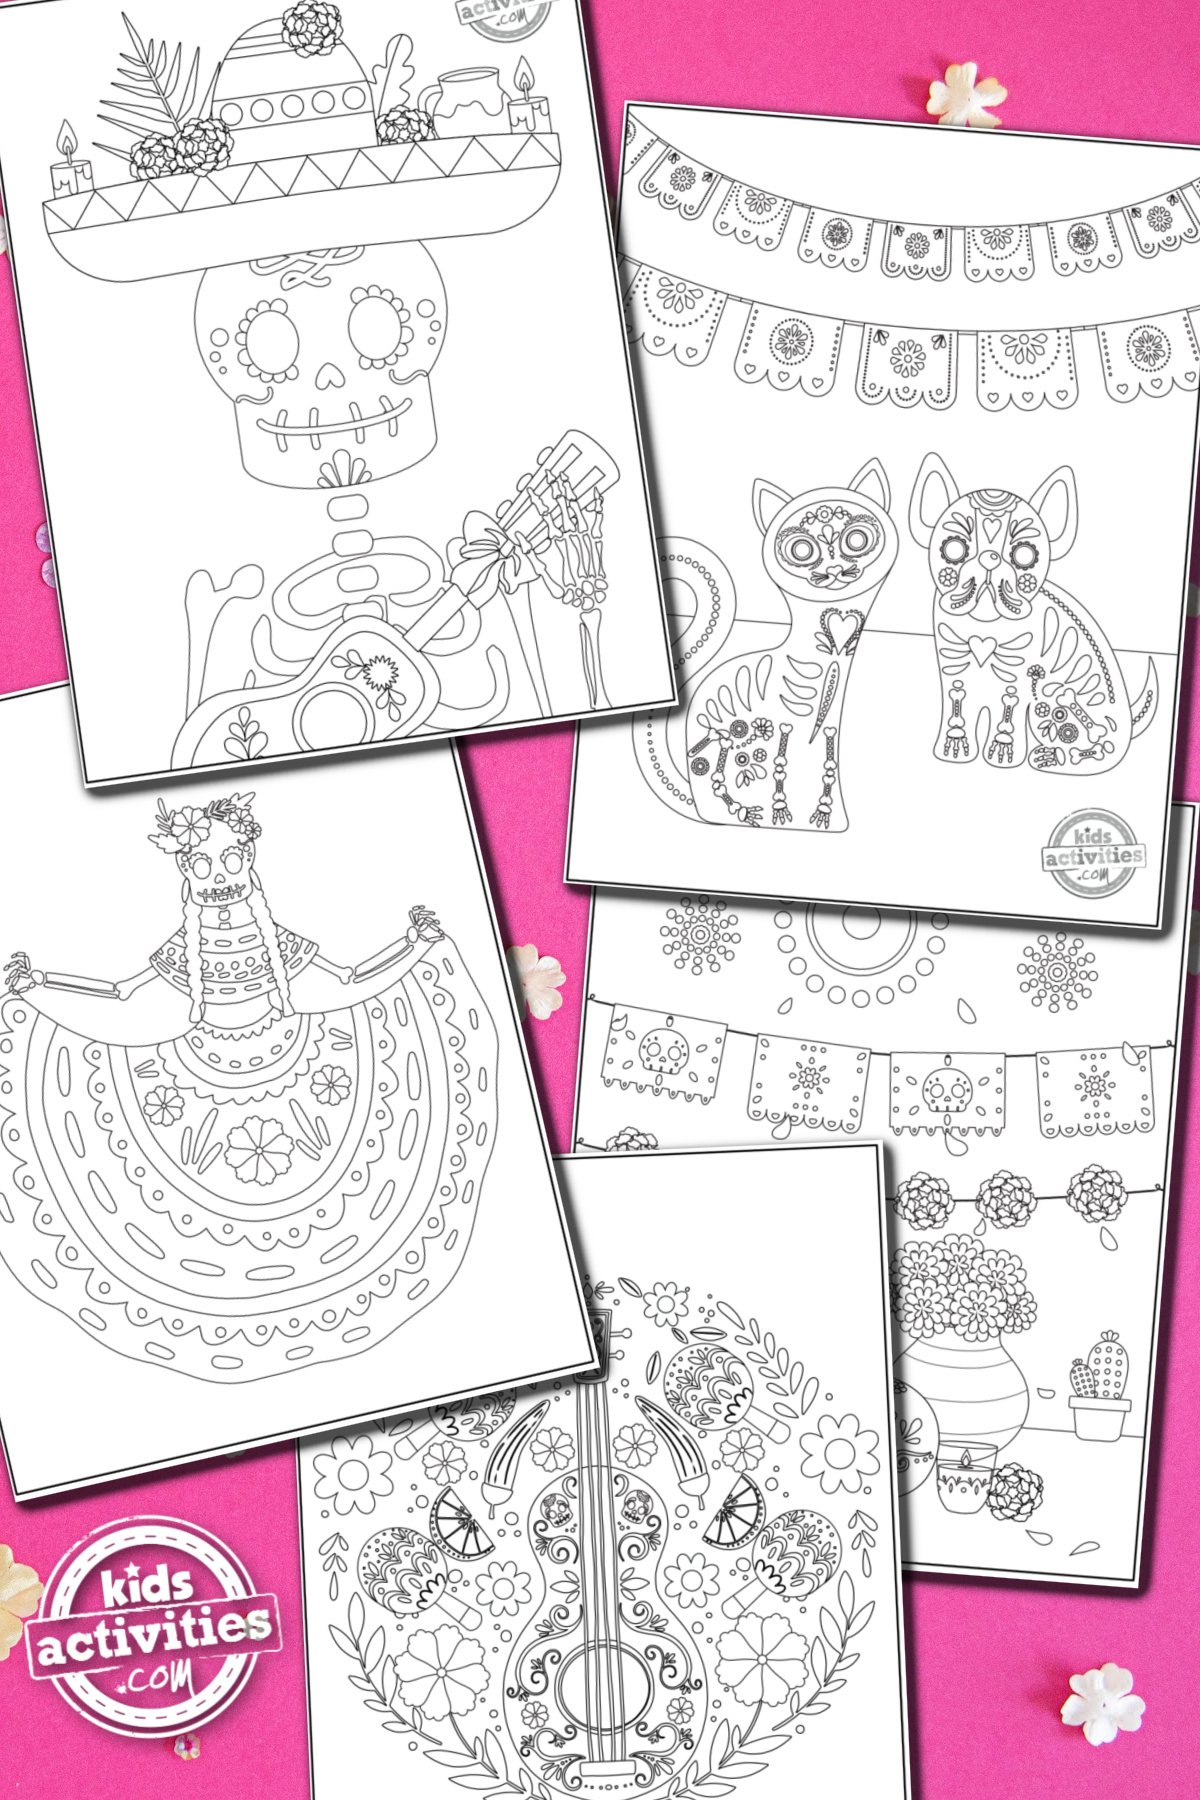 Beautiful day of the dead coloring pages for dia de muertos celebration kids activities blog